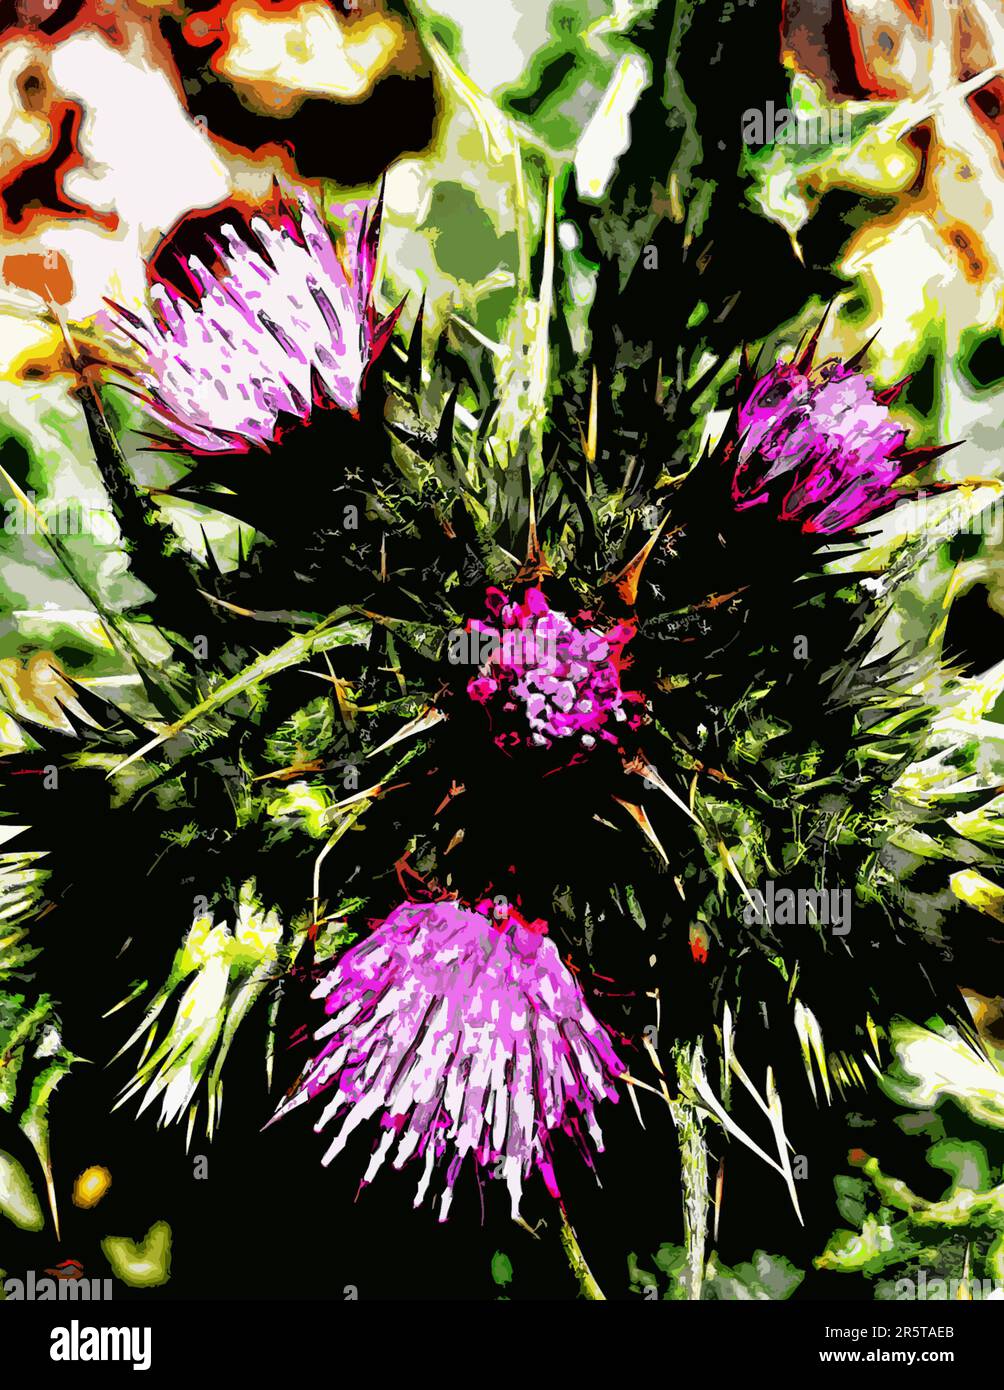 Bold & stylised art of Carduus pycnocephalus, Italian thistle, Italian plumeless thistle, Plymouth thistle, considered noxious & invasive by some Stock Photo